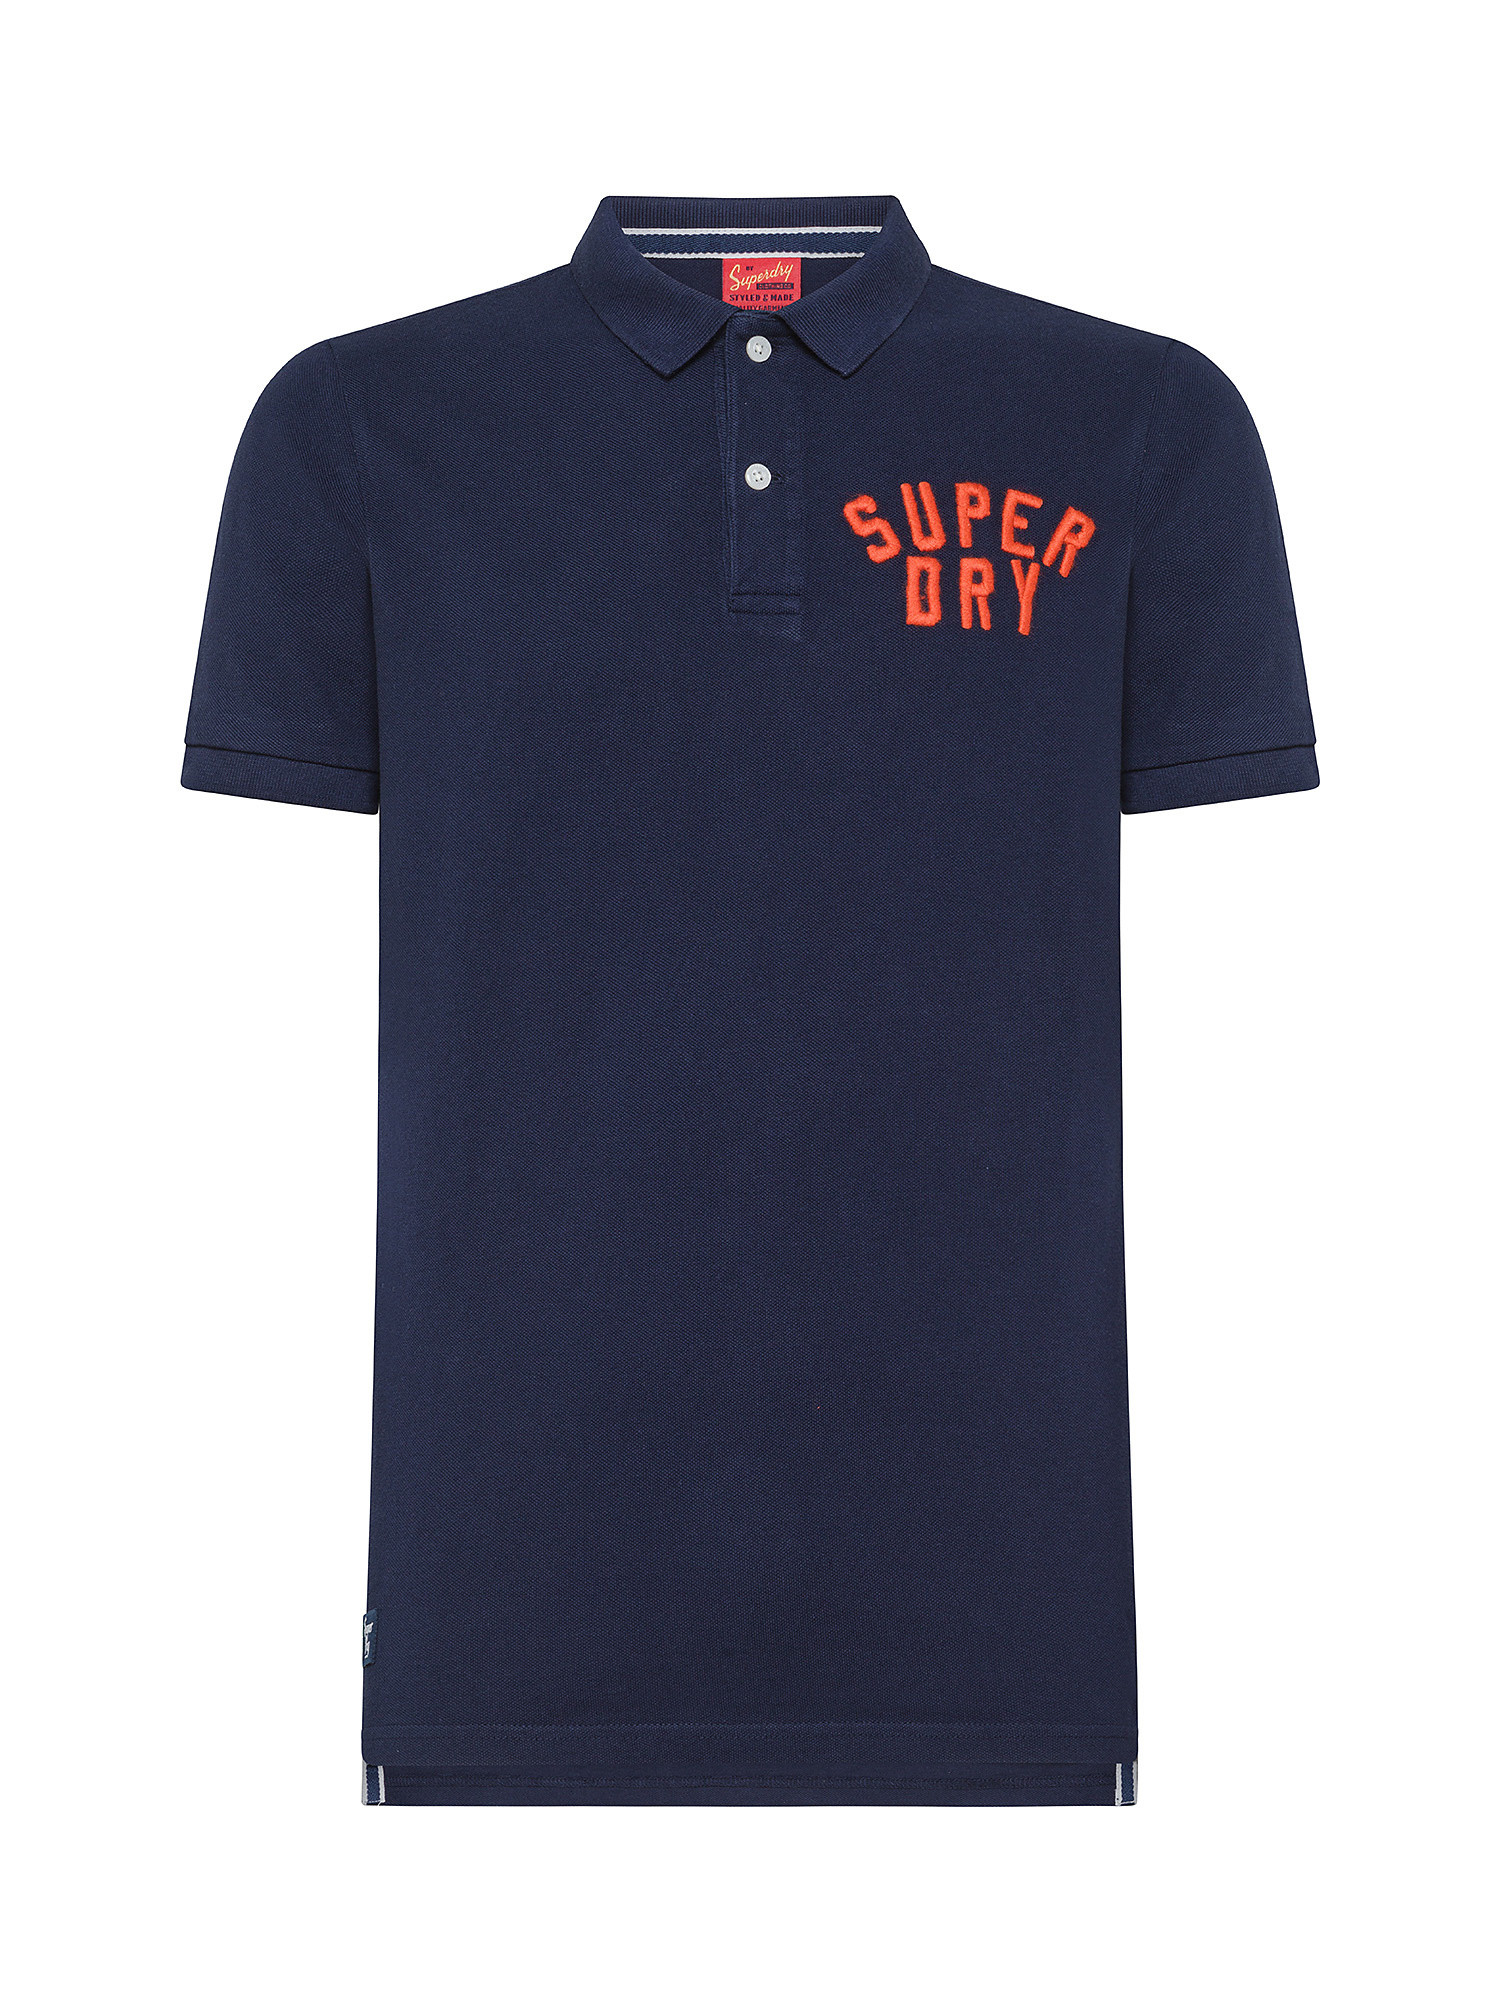 Superdry - Polo in cotone piquet con logo, Blu, large image number 0